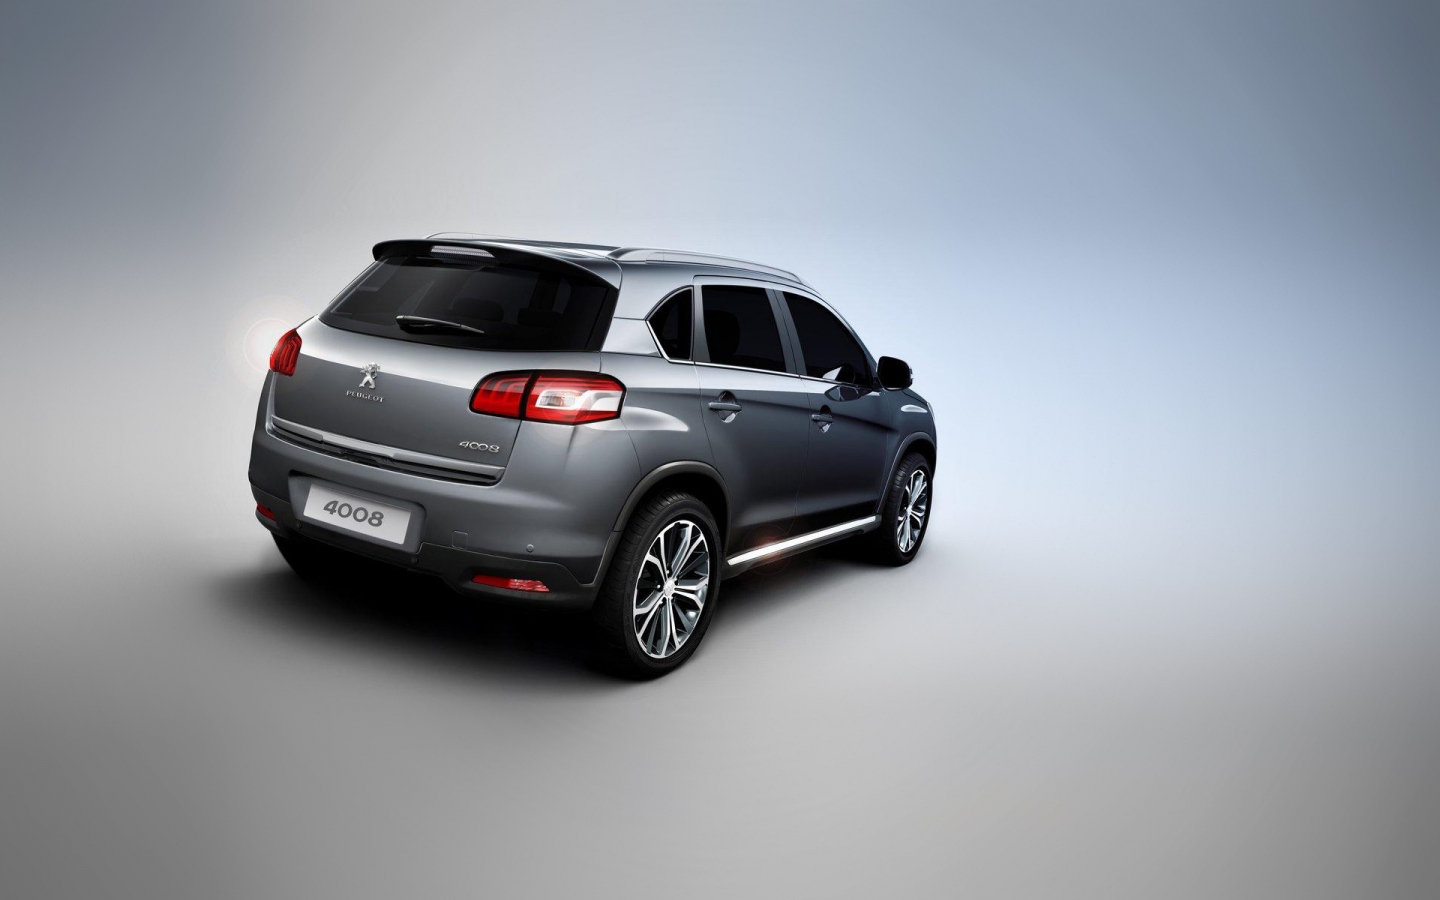 2012 Peugeot 4008 Rear for 1440 x 900 widescreen resolution